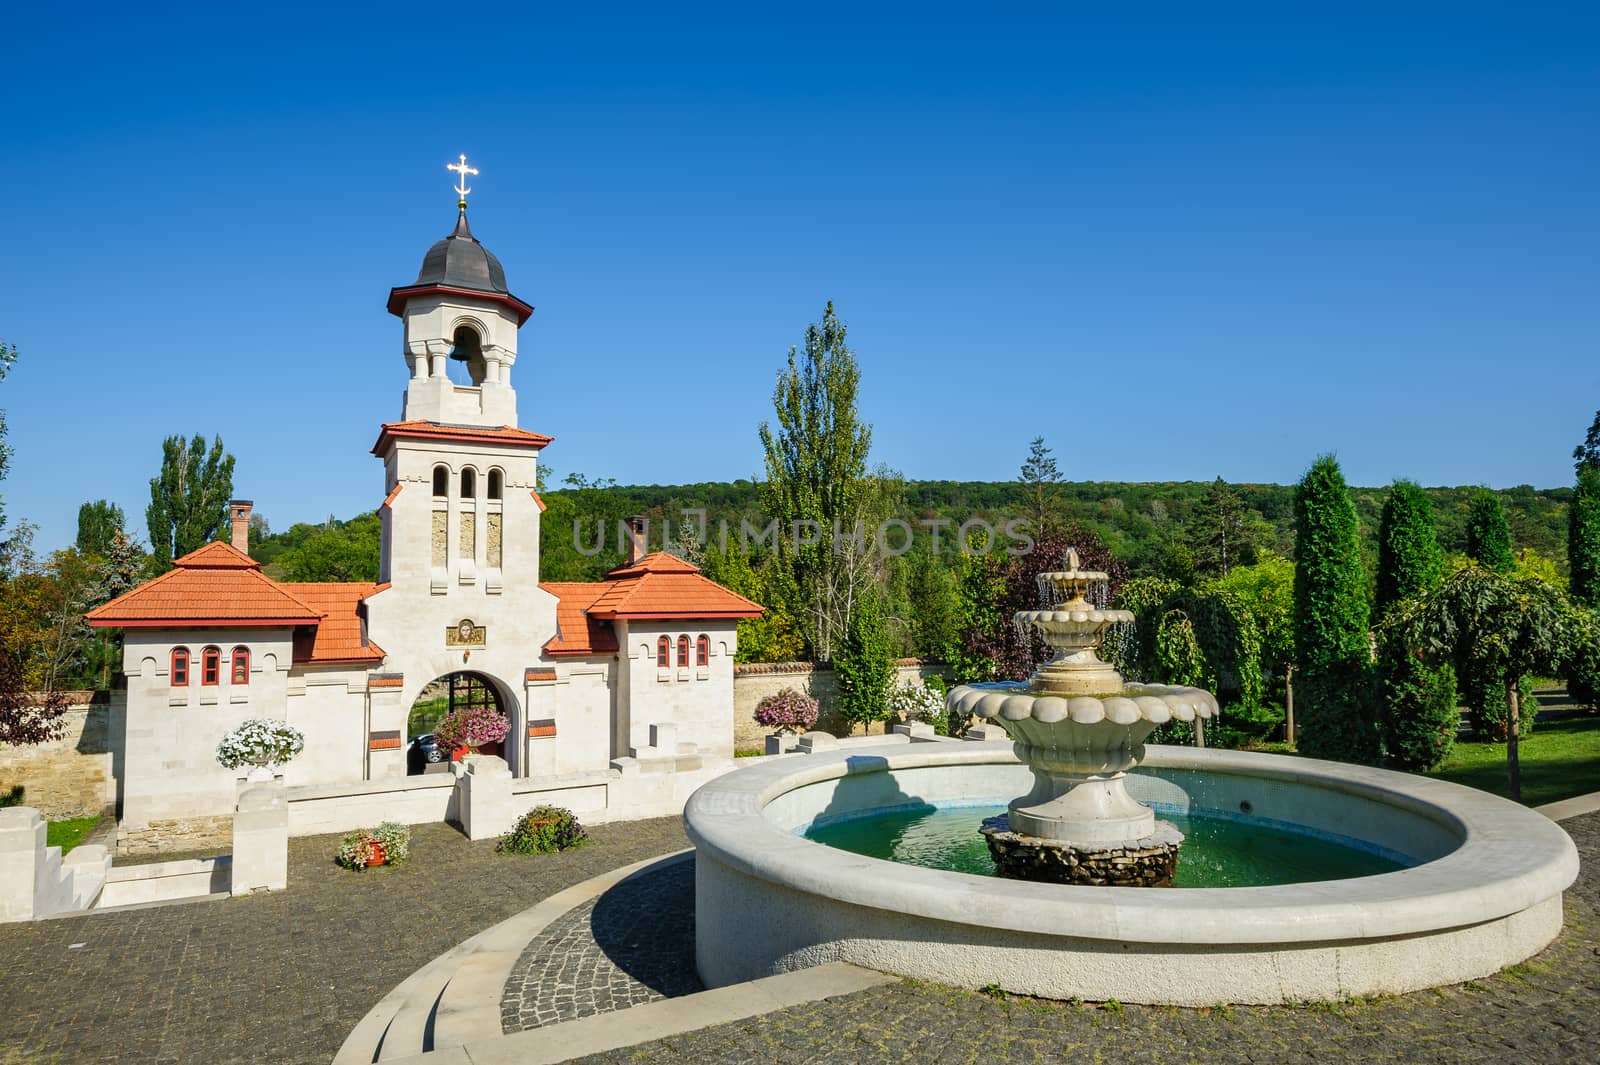 Fountain and entrance gates with bell tower, at Curchi Orthodox Christian Monastery, Moldova